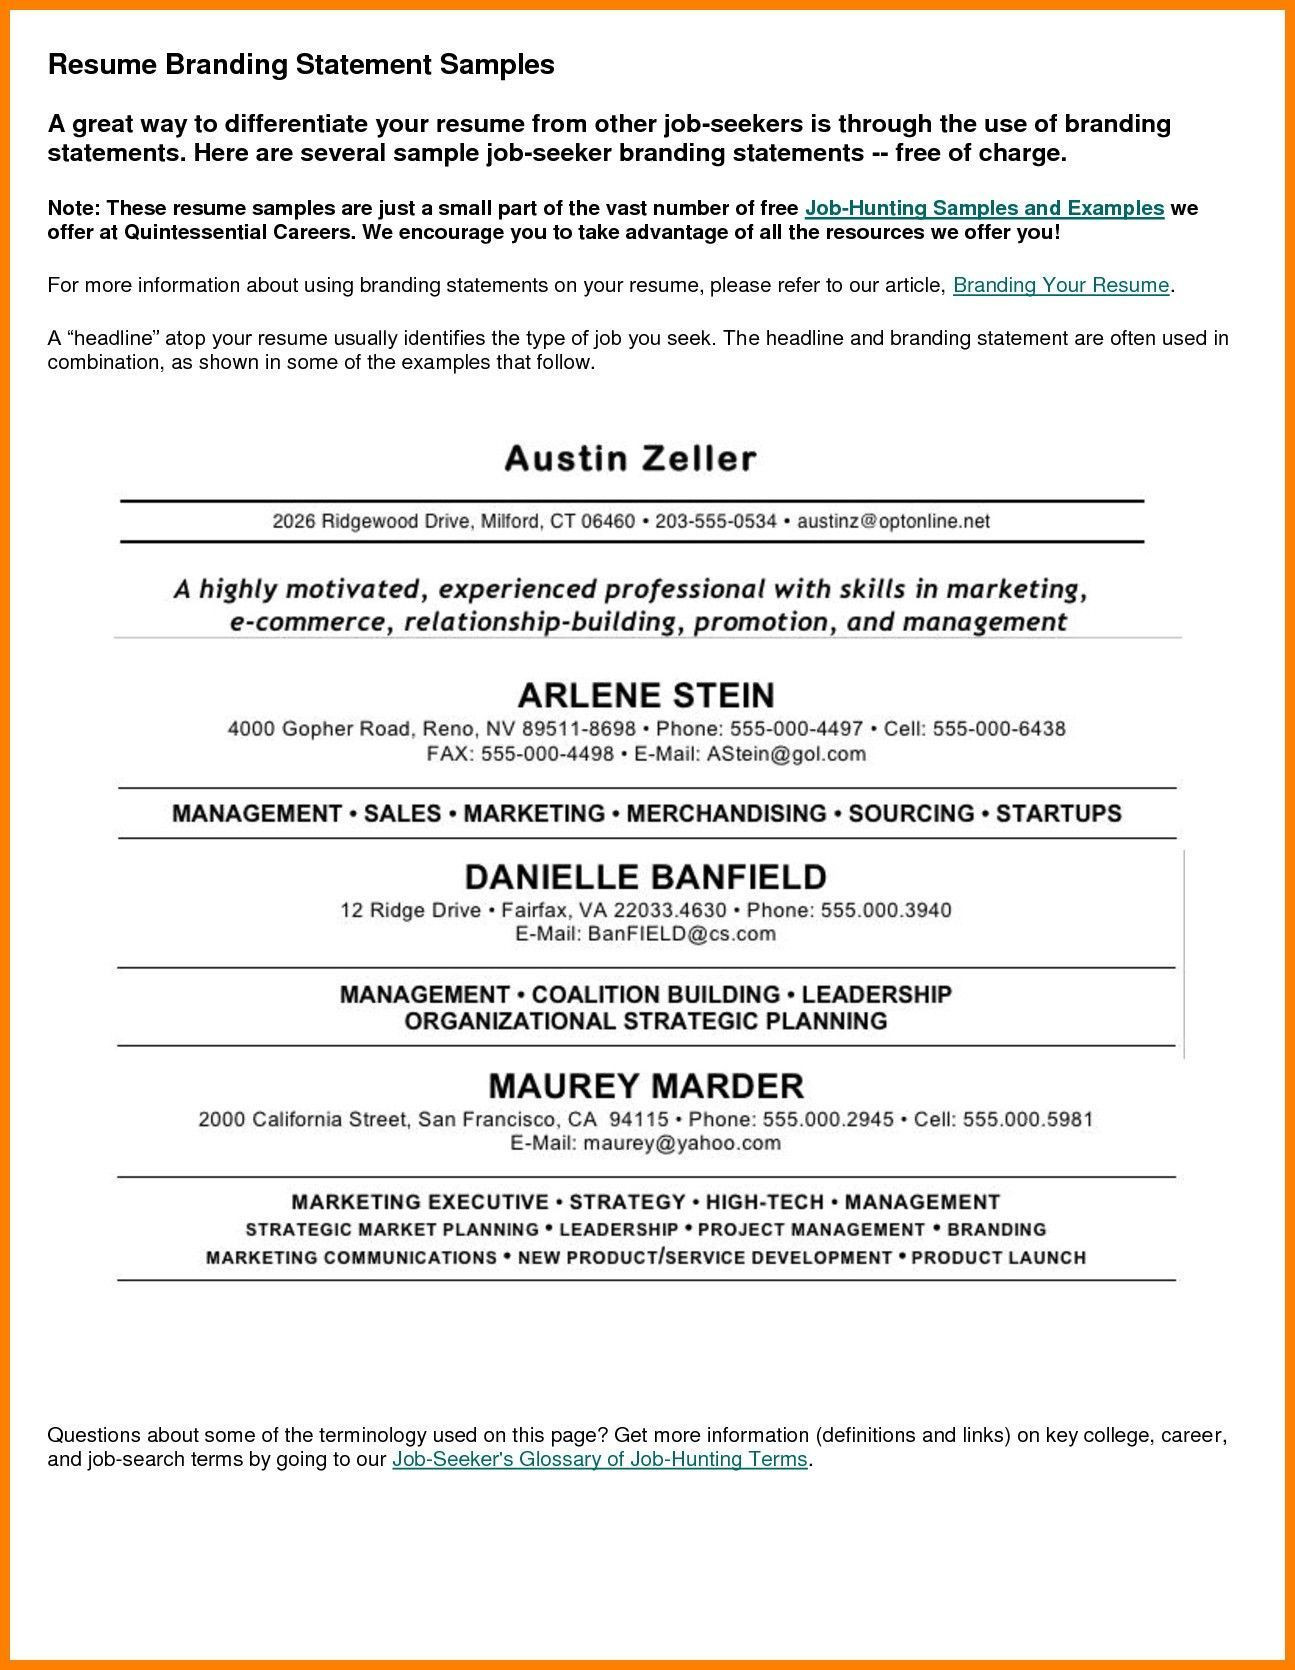 Sample Resume with Personal Brand Statement Personal Statement Examples for Jobs Personal Statement Examples …